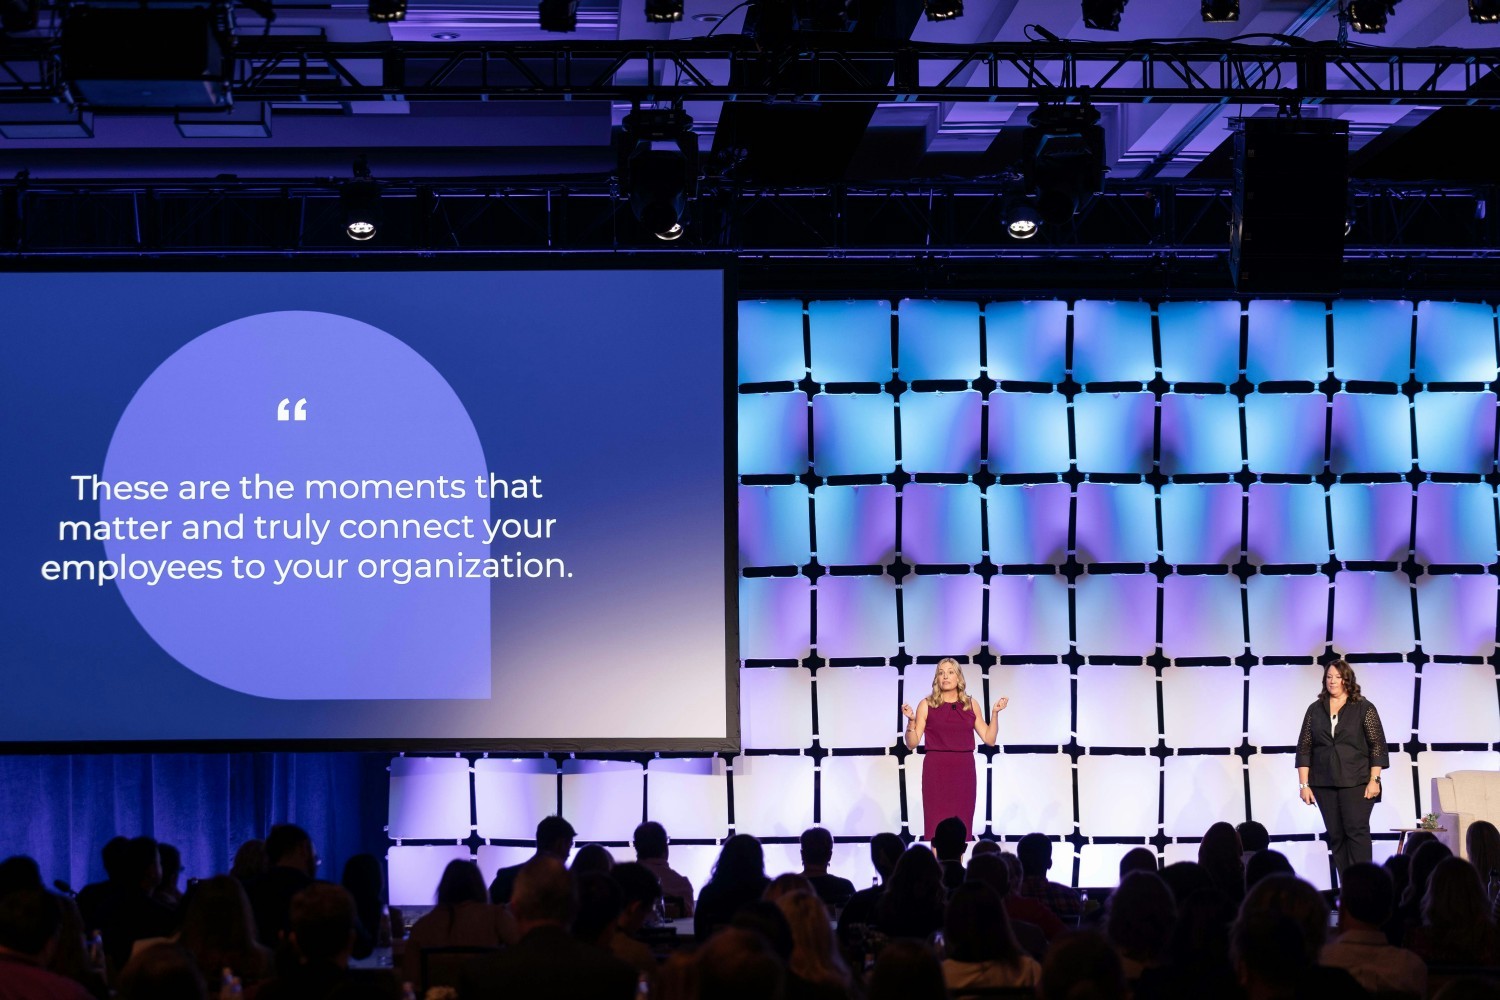 Our CEO & CPO on stage at our EX conference, Attune, sharing the importance of recognizing all the moments that matter.